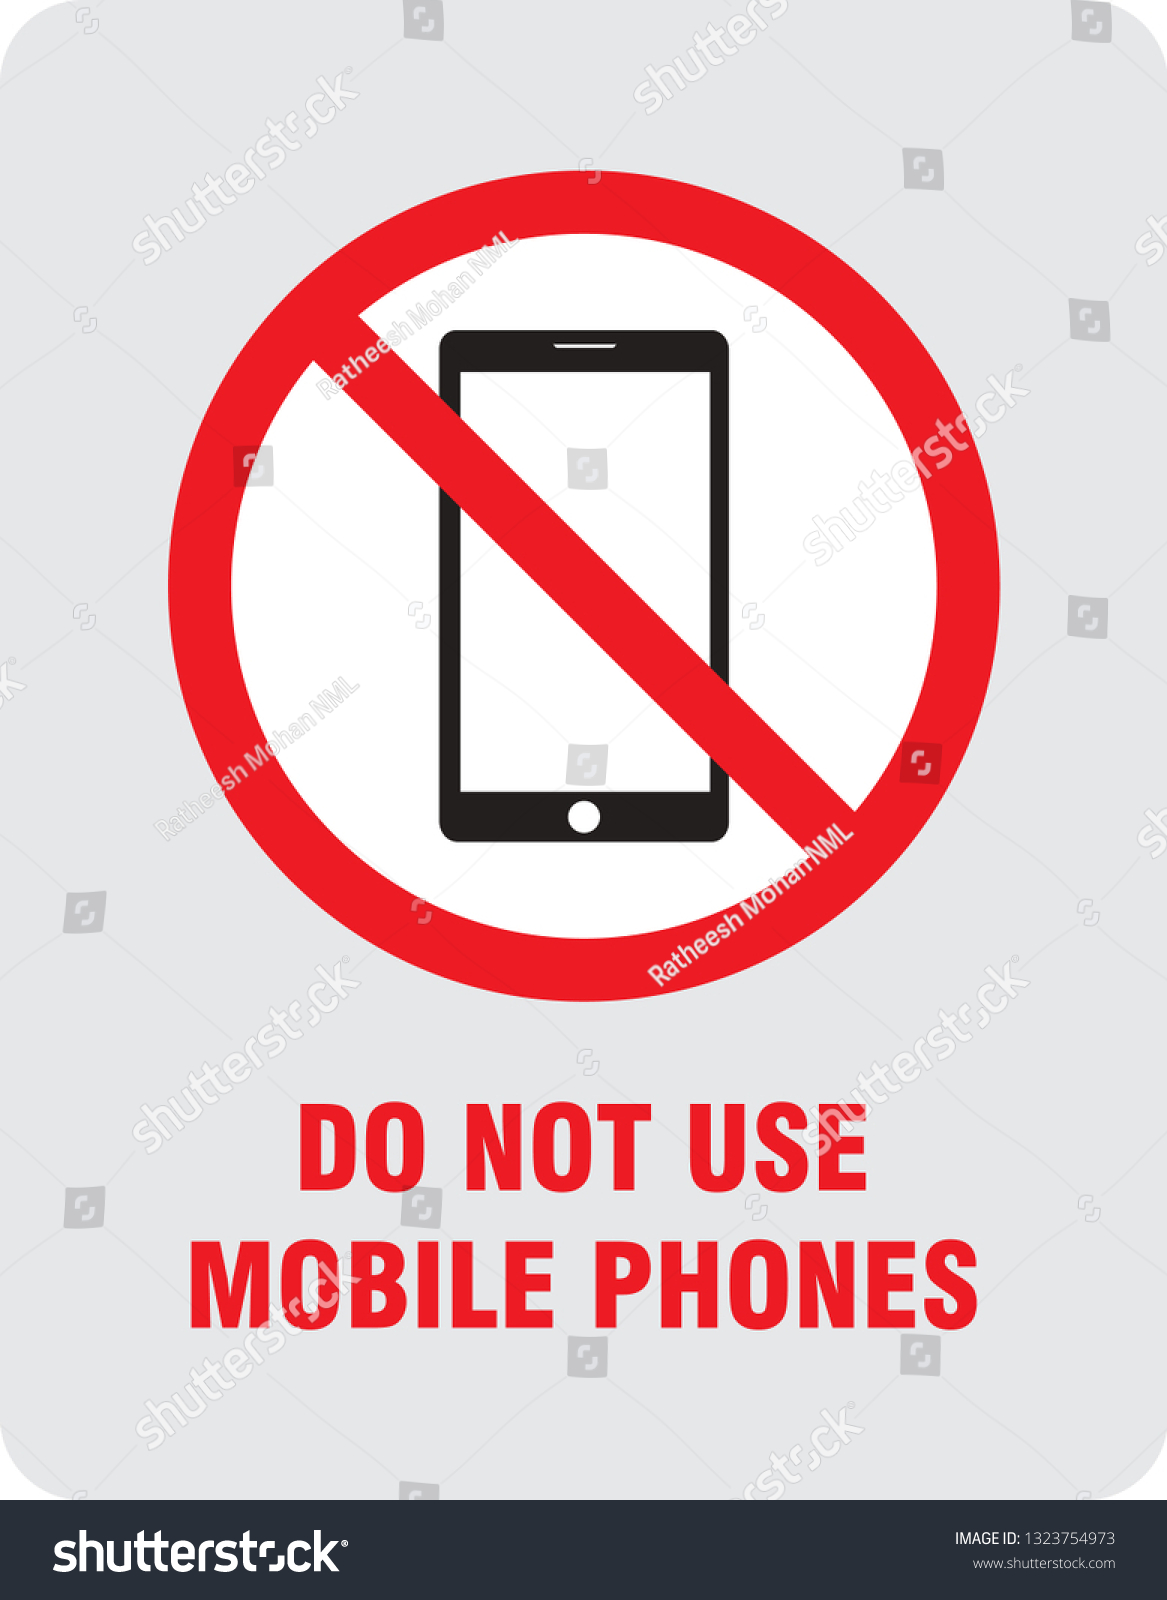 do-not-use-mobile-phone-sign-stock-vector-royalty-free-1323754973